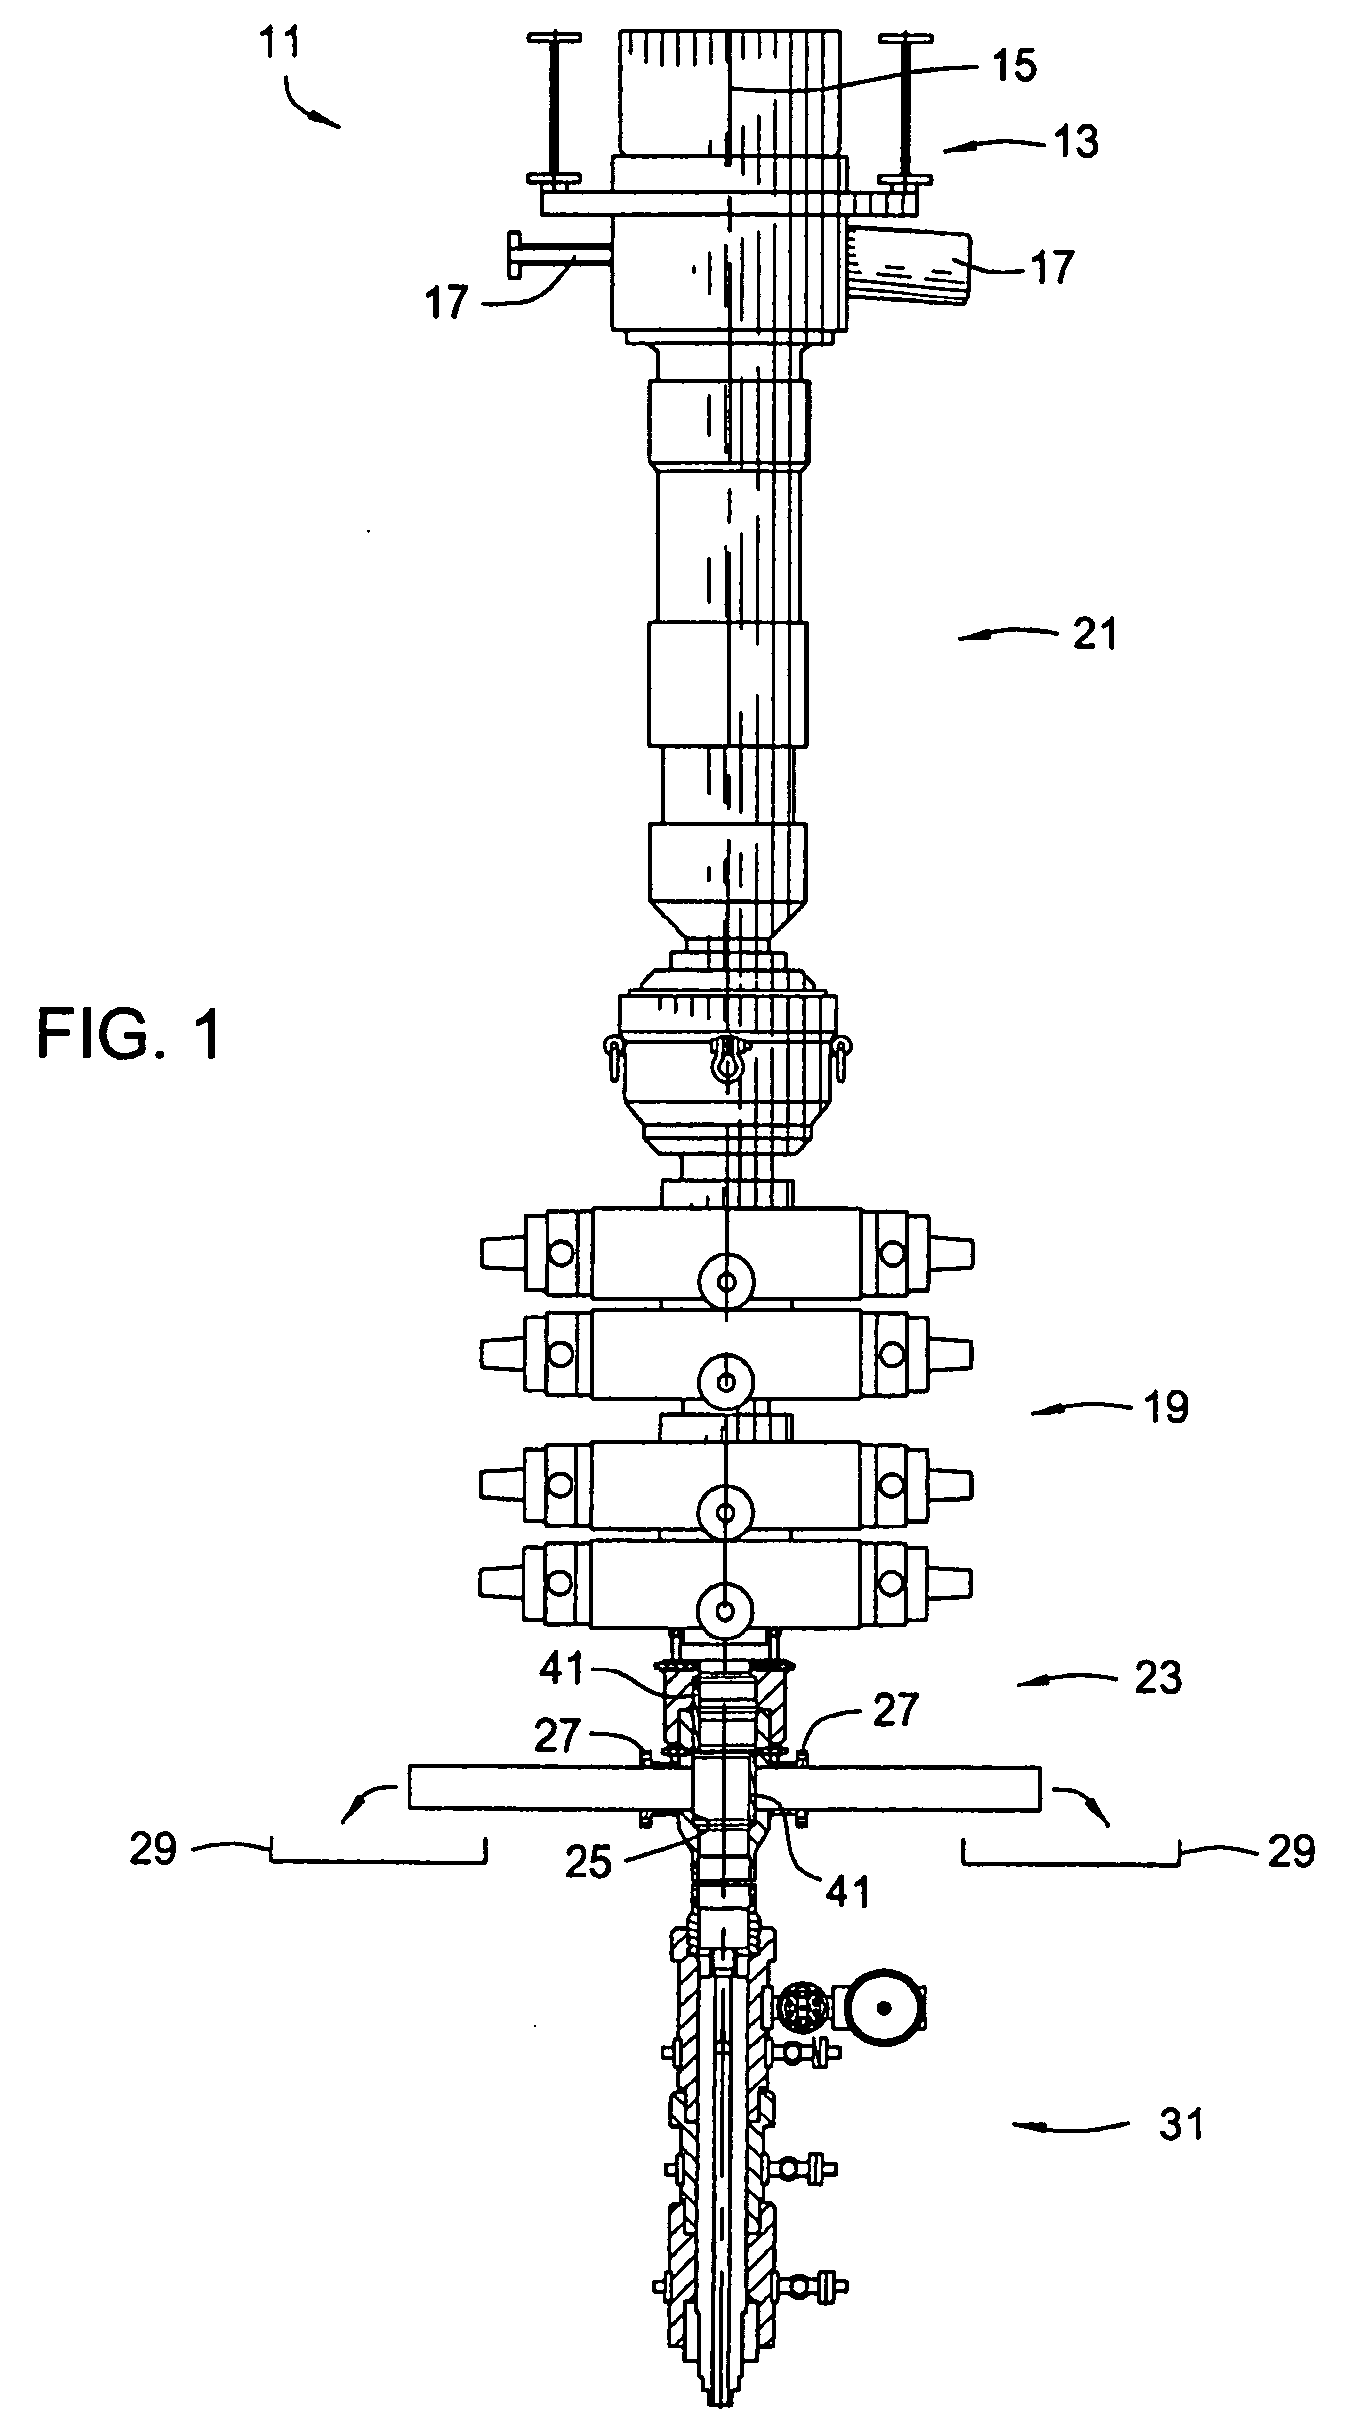 System, method, and apparatus for accessing outlets in a two-stage diverter spool assembly